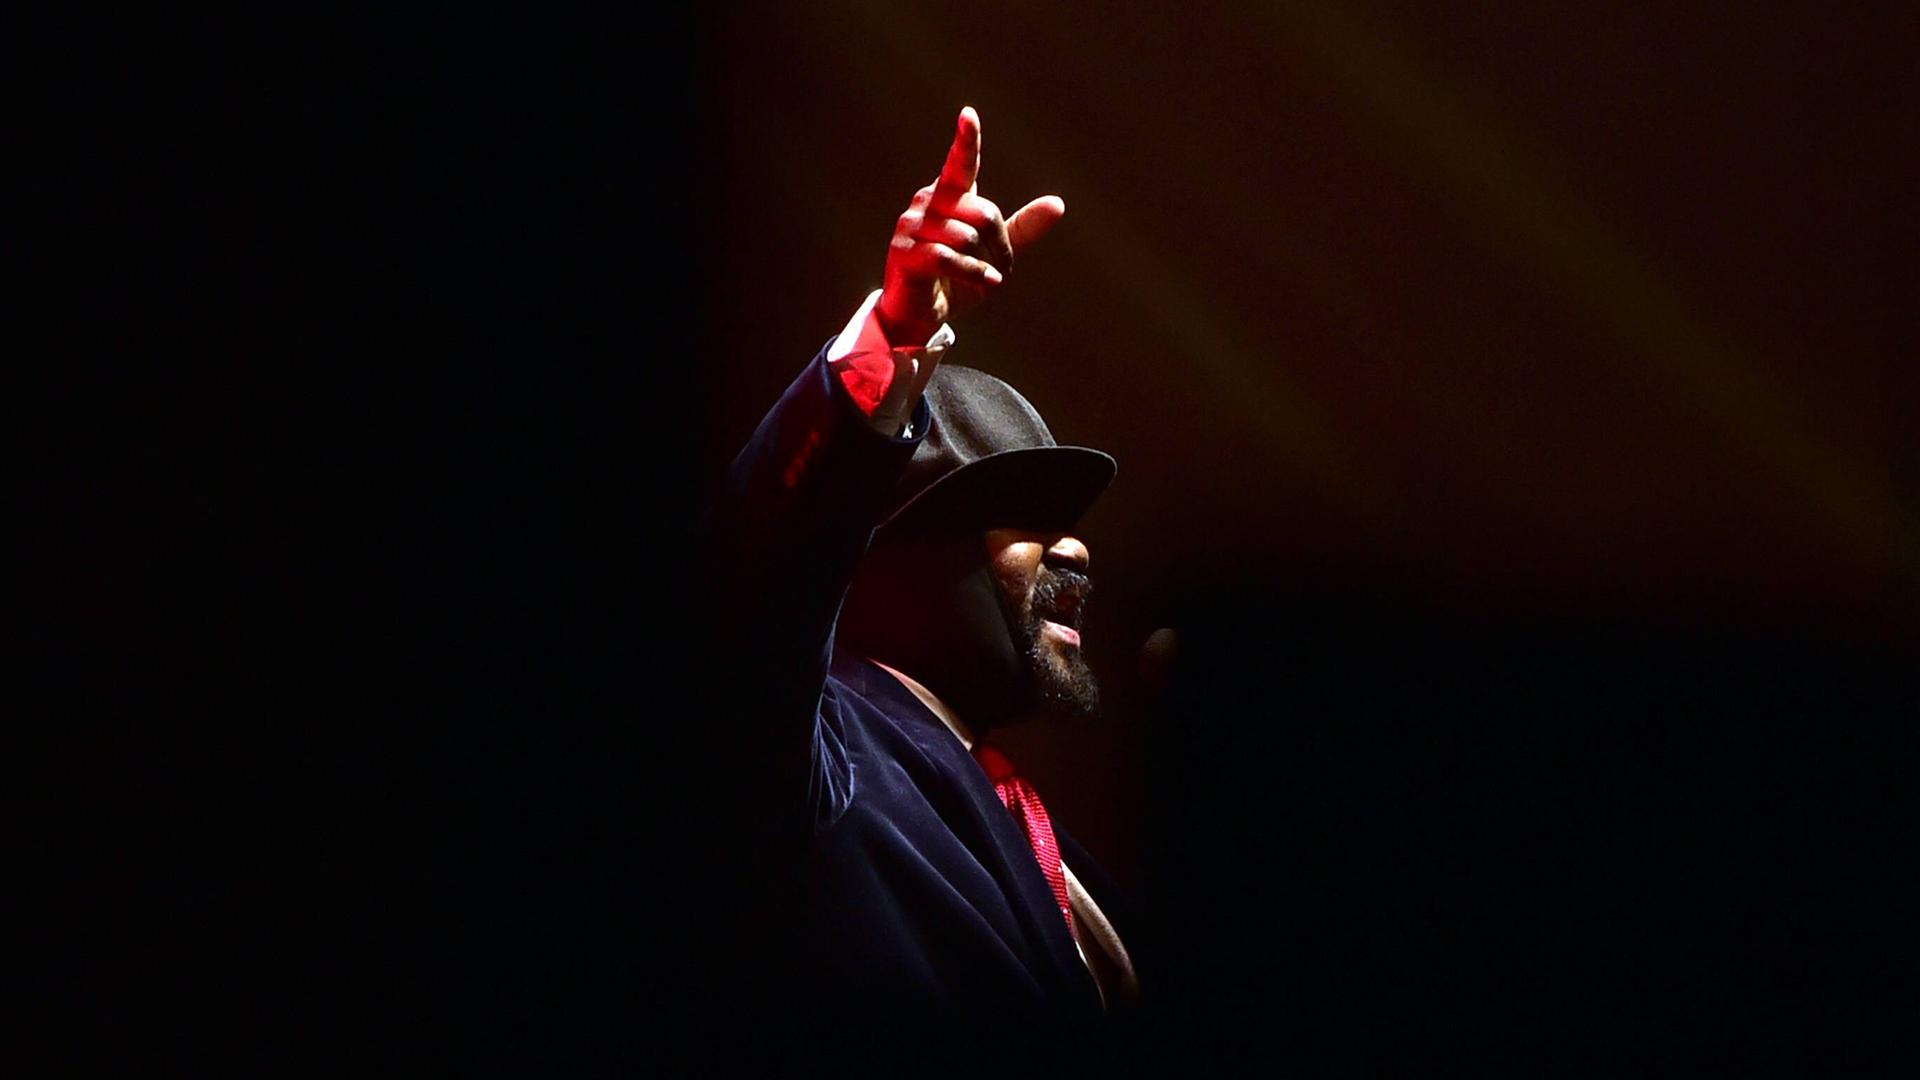 American jazz vocalist and songwriter Gregory Porter performs in Prague Czech Republic April 23 2